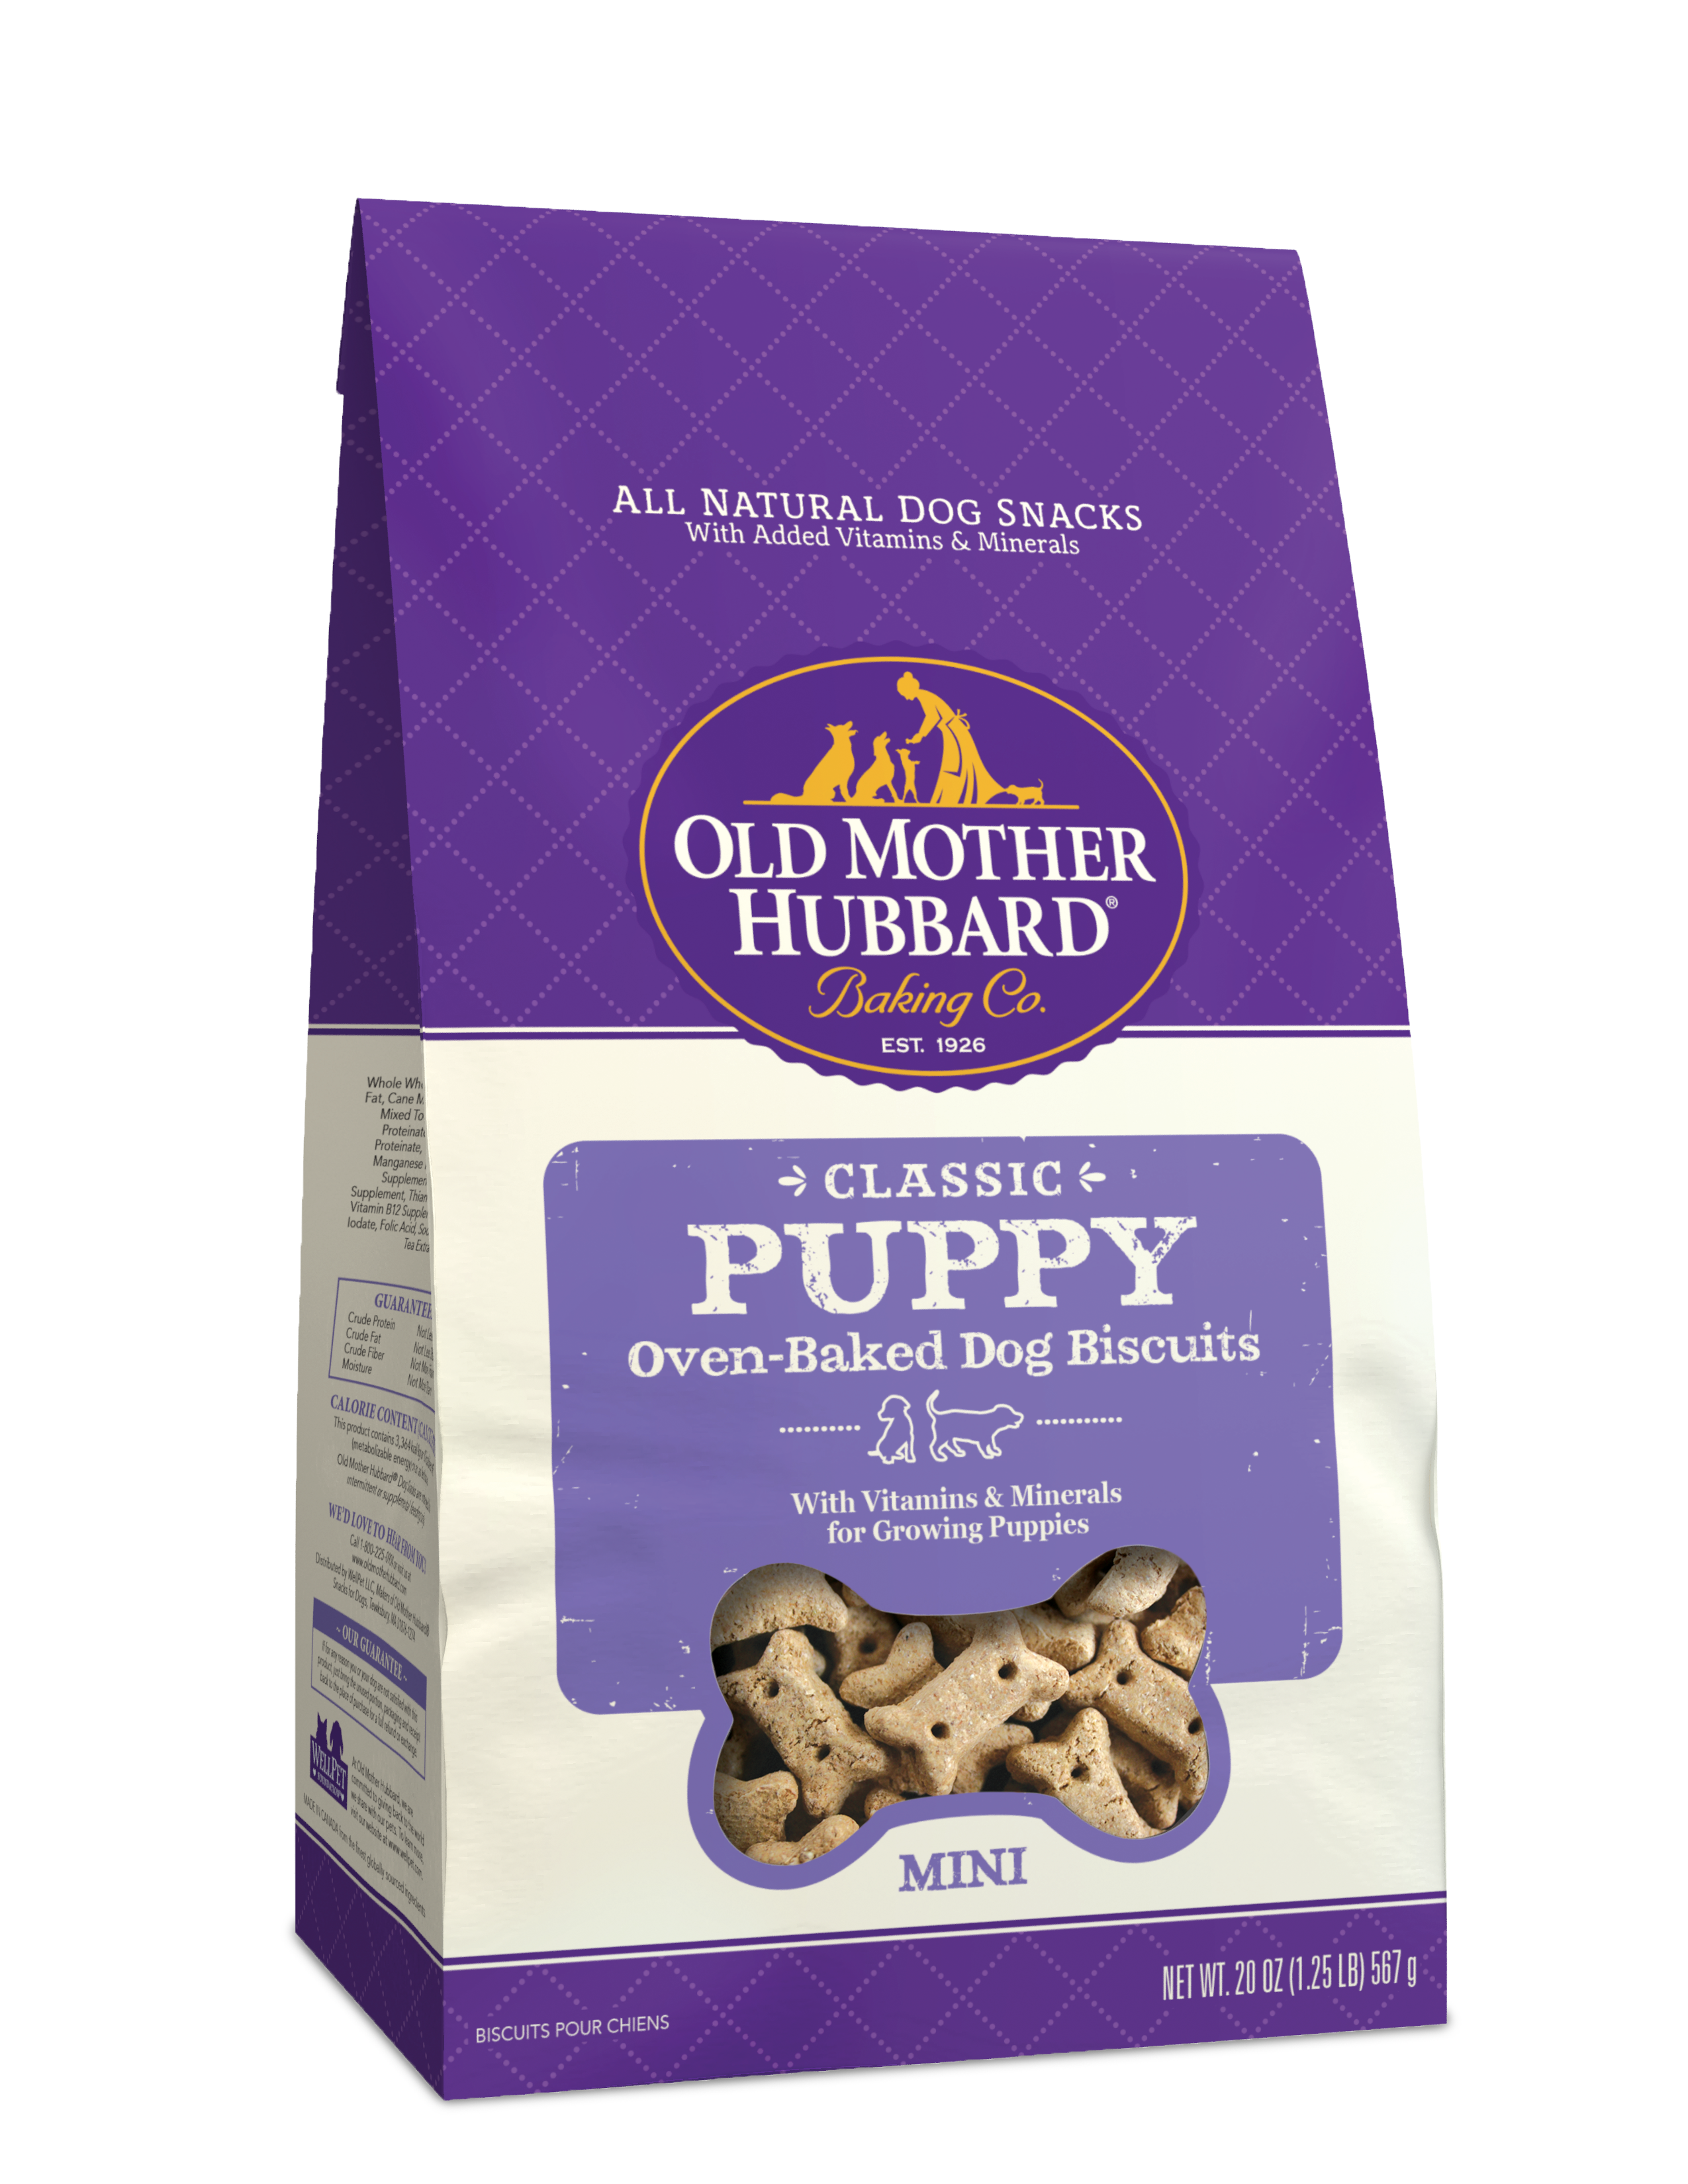 Puppy - Old Mother Hubbard